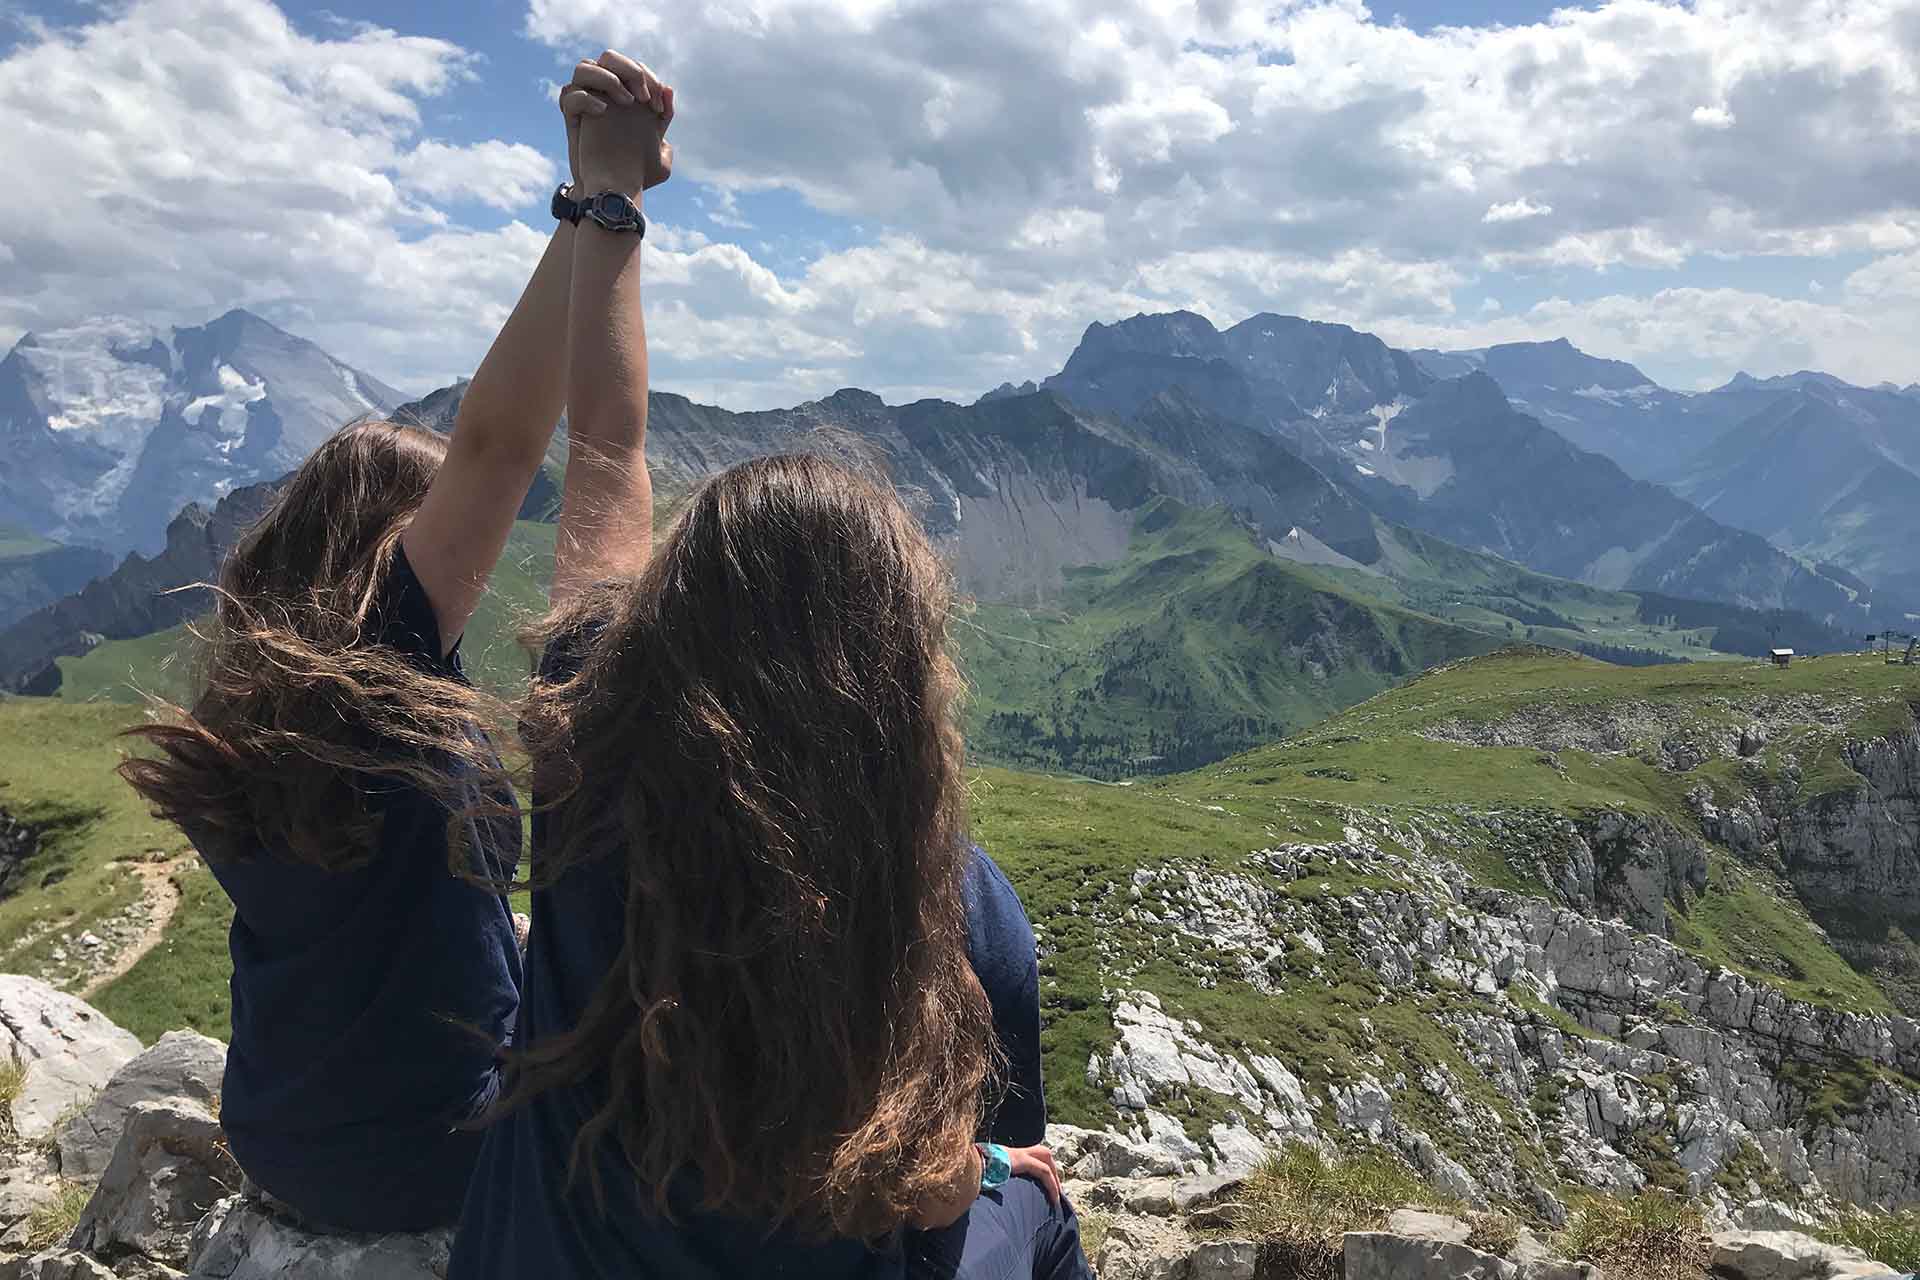 Two girls holding hands up high in a celebratory way while looking out over a valley from a high mountaintop